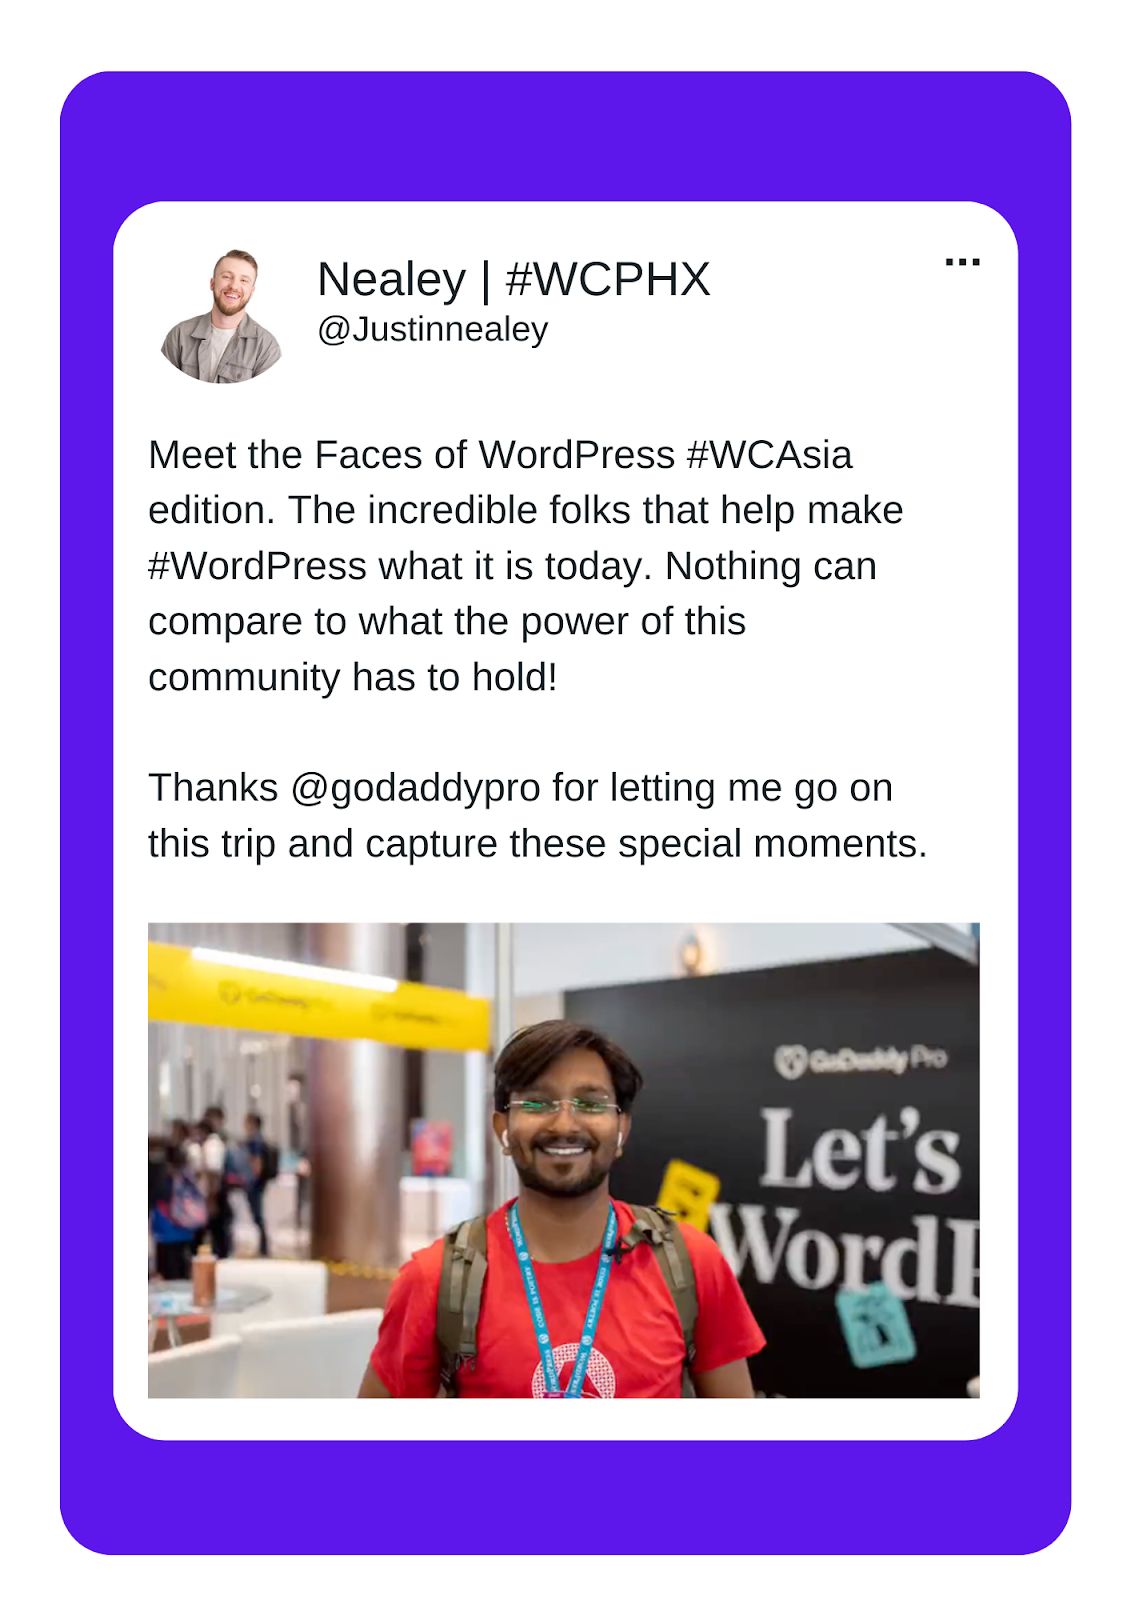 A tweet from Justin Nealey layered over a purple background that reads "Meet the Faces of #WCAsia edition. The incredible folks that help make #WordPress what it is today. Nothing can compare to what the power of this community has to hold. Thanks @godaddypro for letting me go on this trip and capture these special moments." Beneath that is a picture of short haired young man with a red shirt at Word Camp Asia.